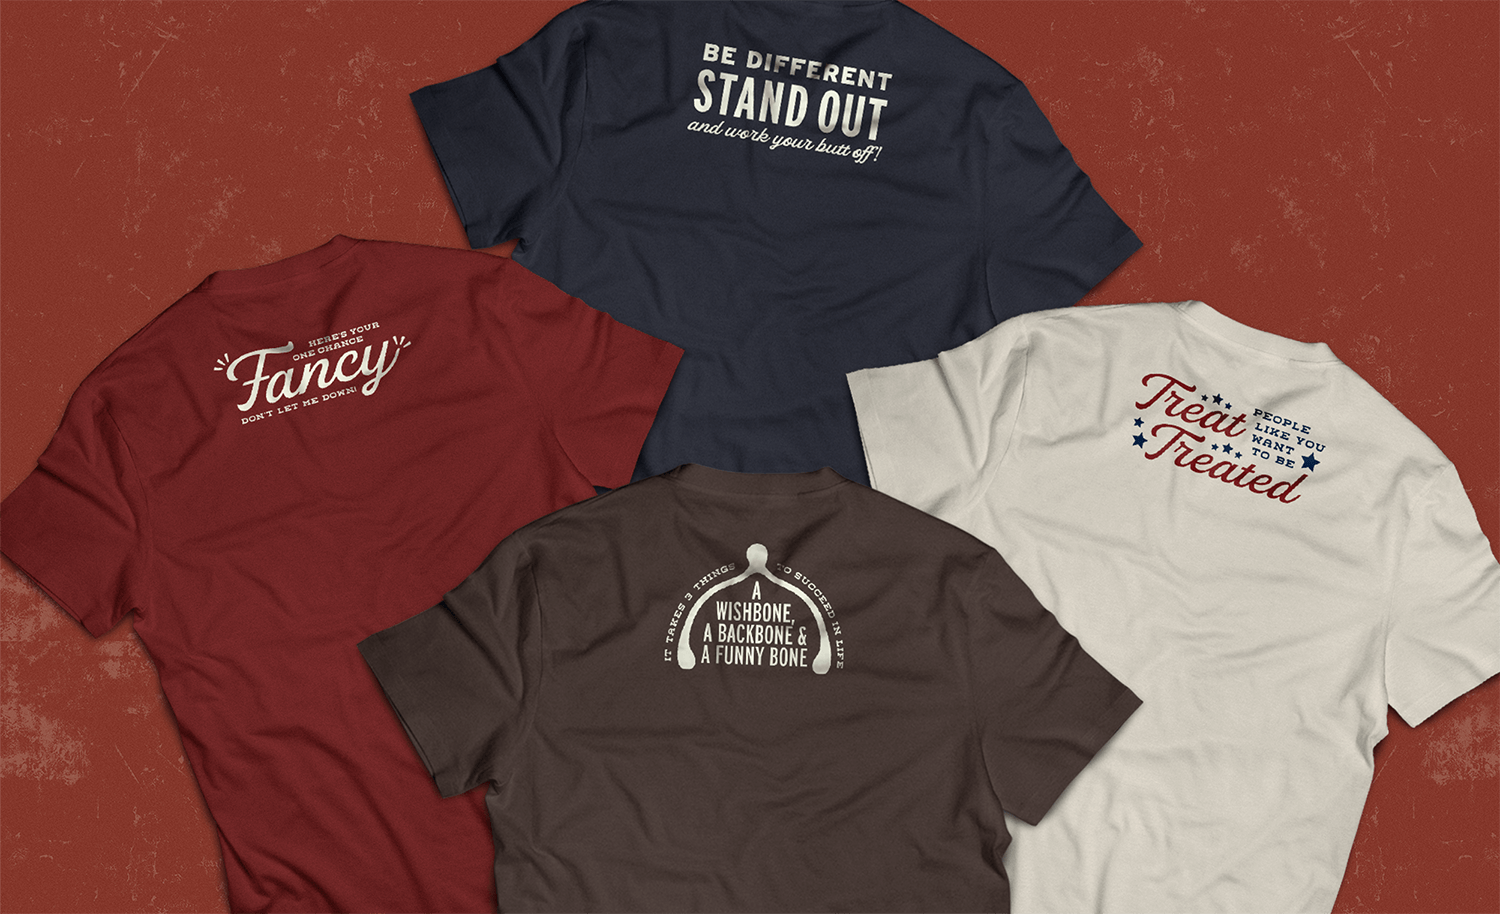 Reba's Place T-Shirt designs laid in flat lay. From left to right: Red shirt with 